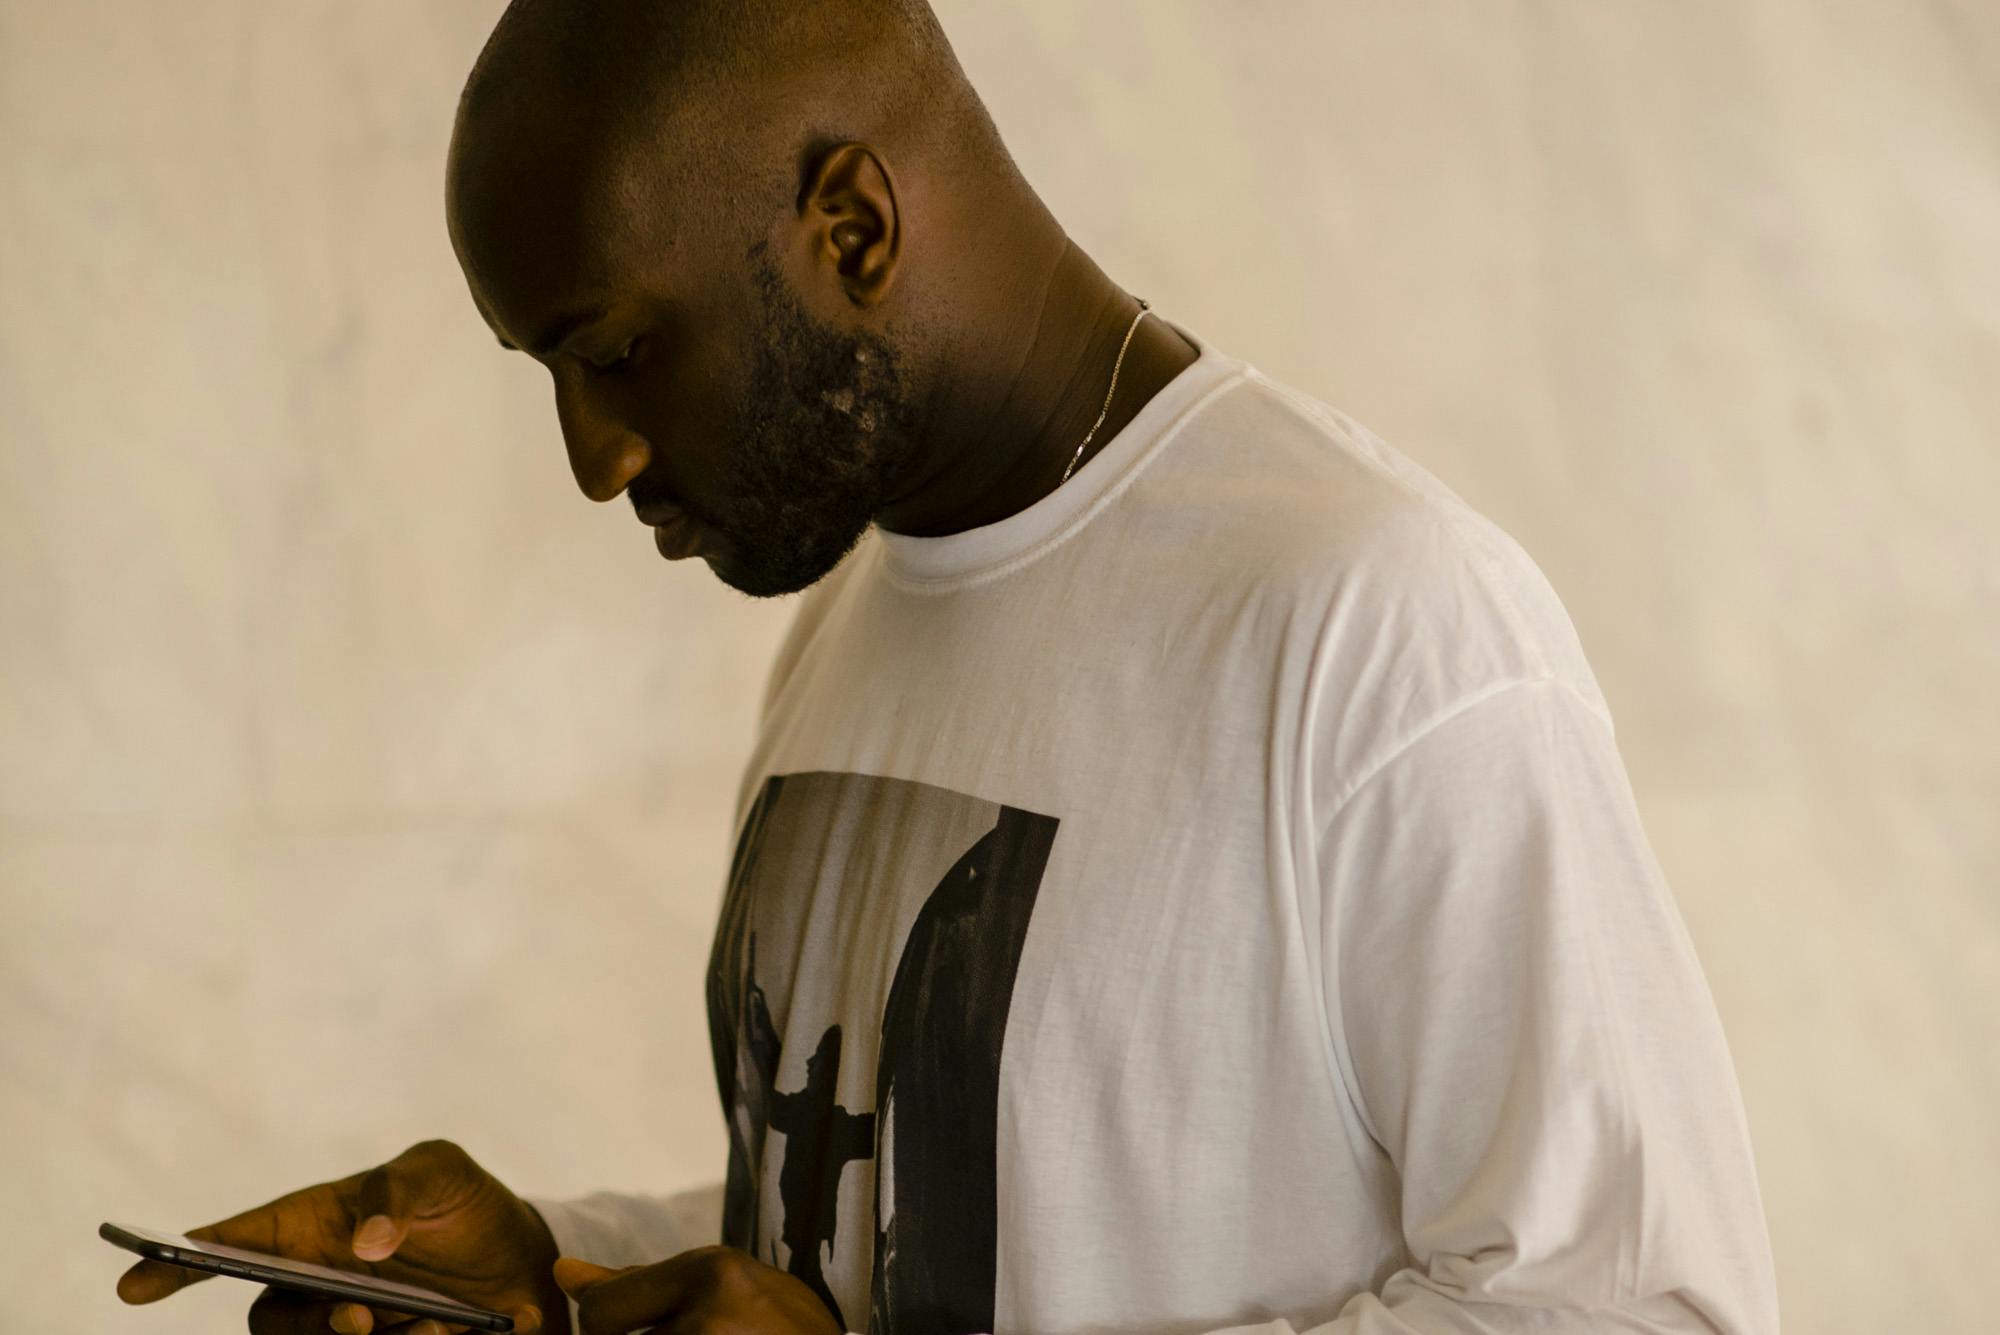 The Life of Virgil Abloh - An Everlasting Memory of a Visionary